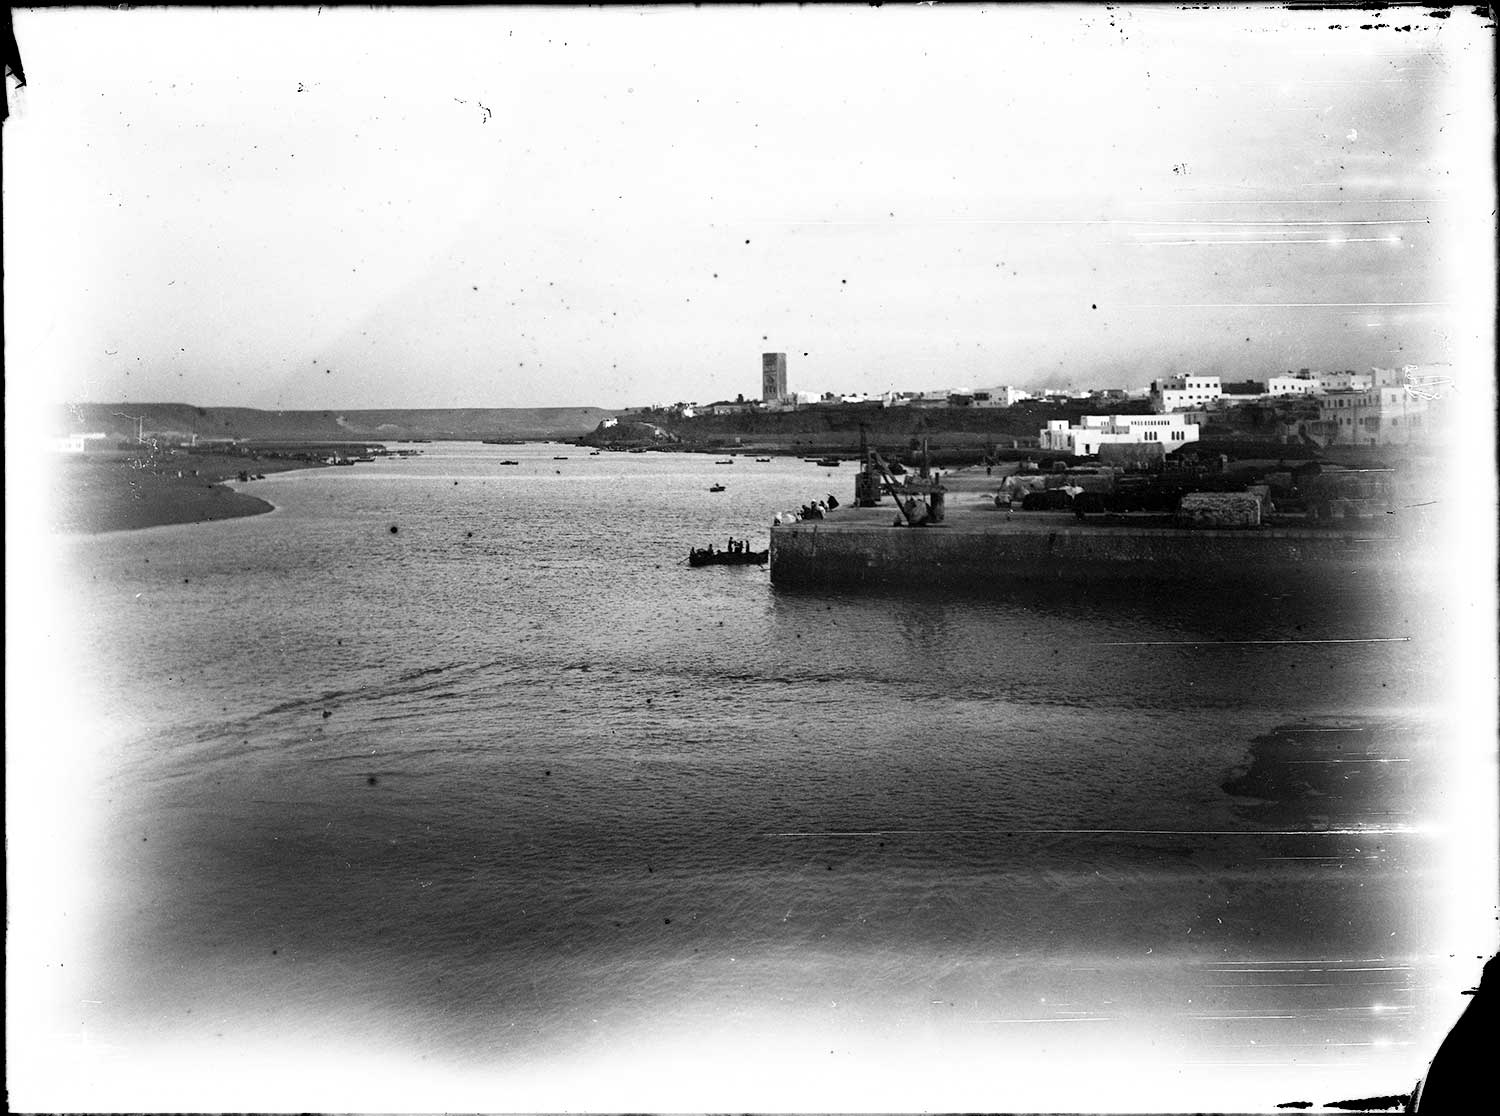 View of the Bou Regreg Port toward Jami' al-Hassan from the river